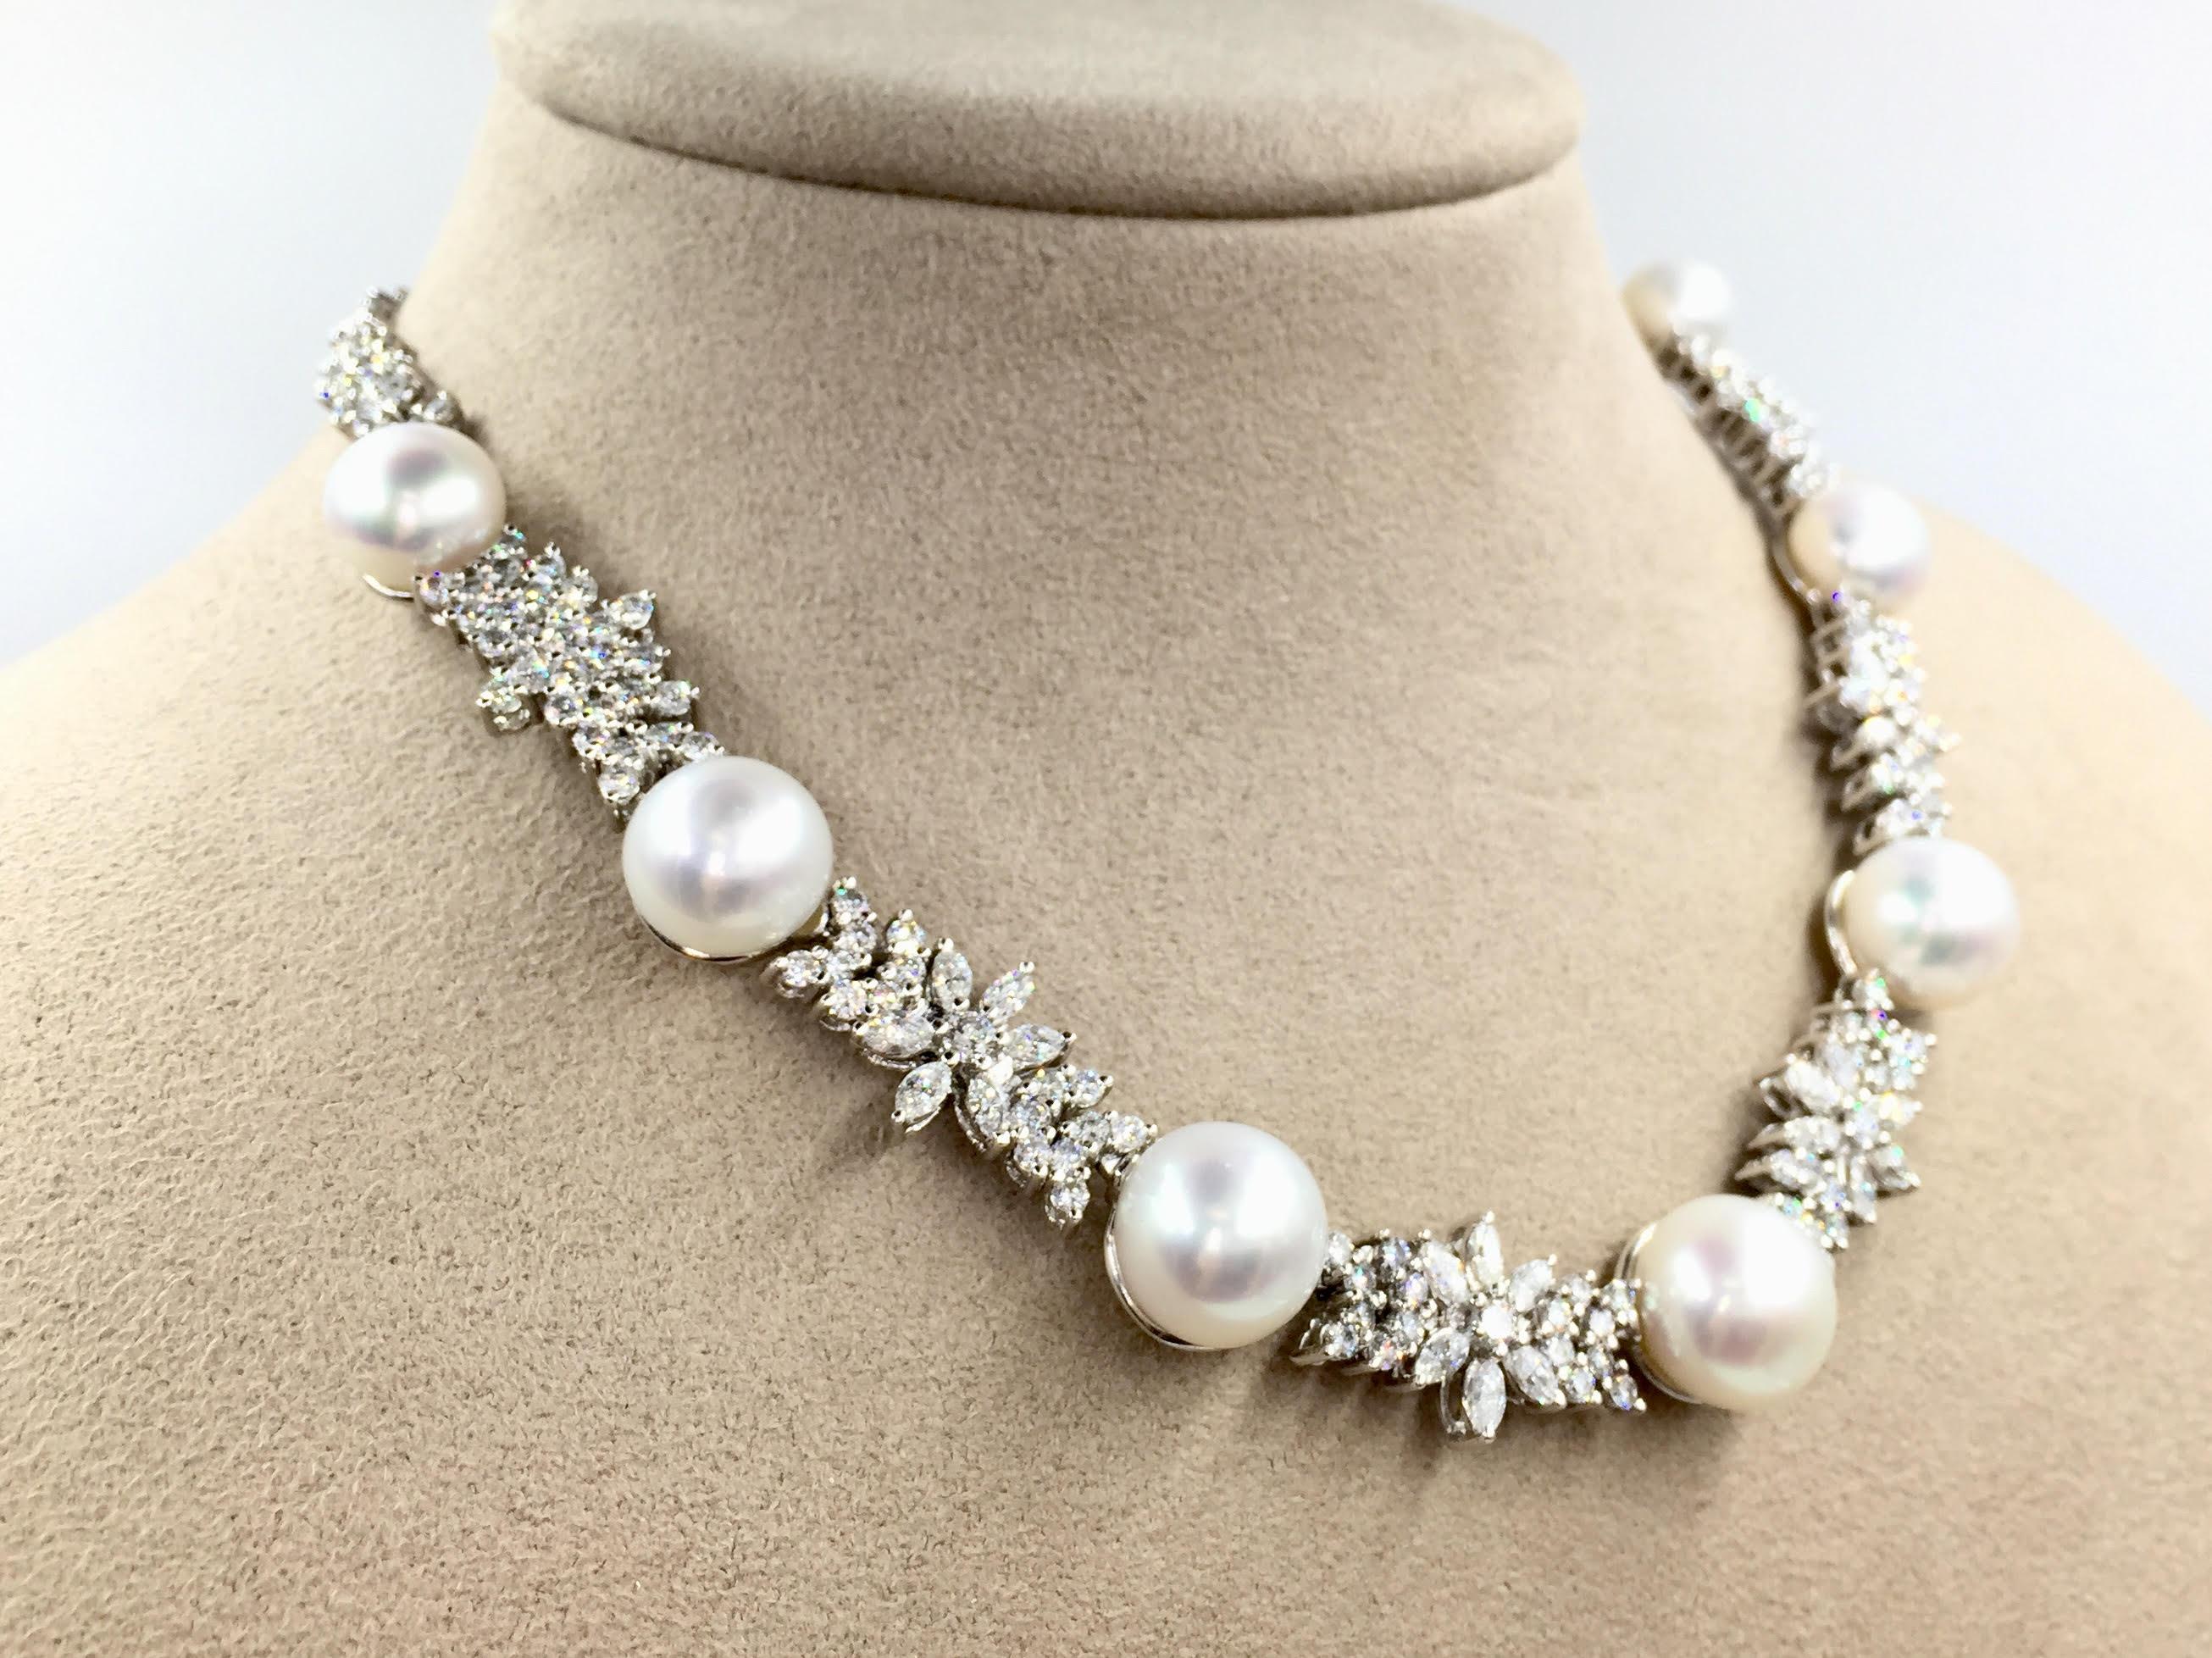 High Victorian Diamond and South Sea Pearl Platinum Necklace 16.76 Carat Total Weight